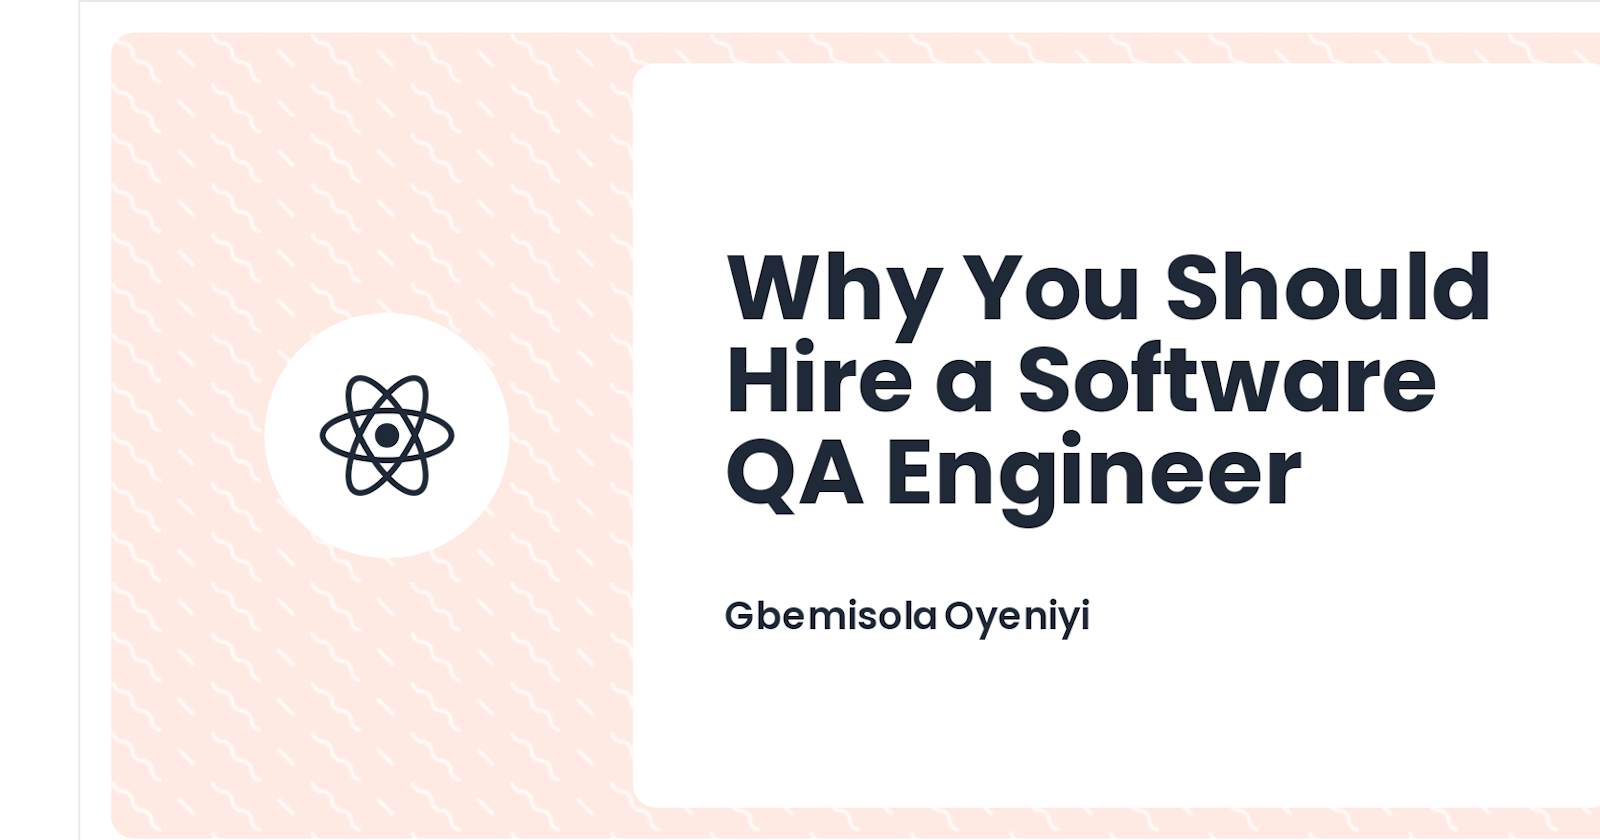 Why You Should Hire a Software QA Engineer